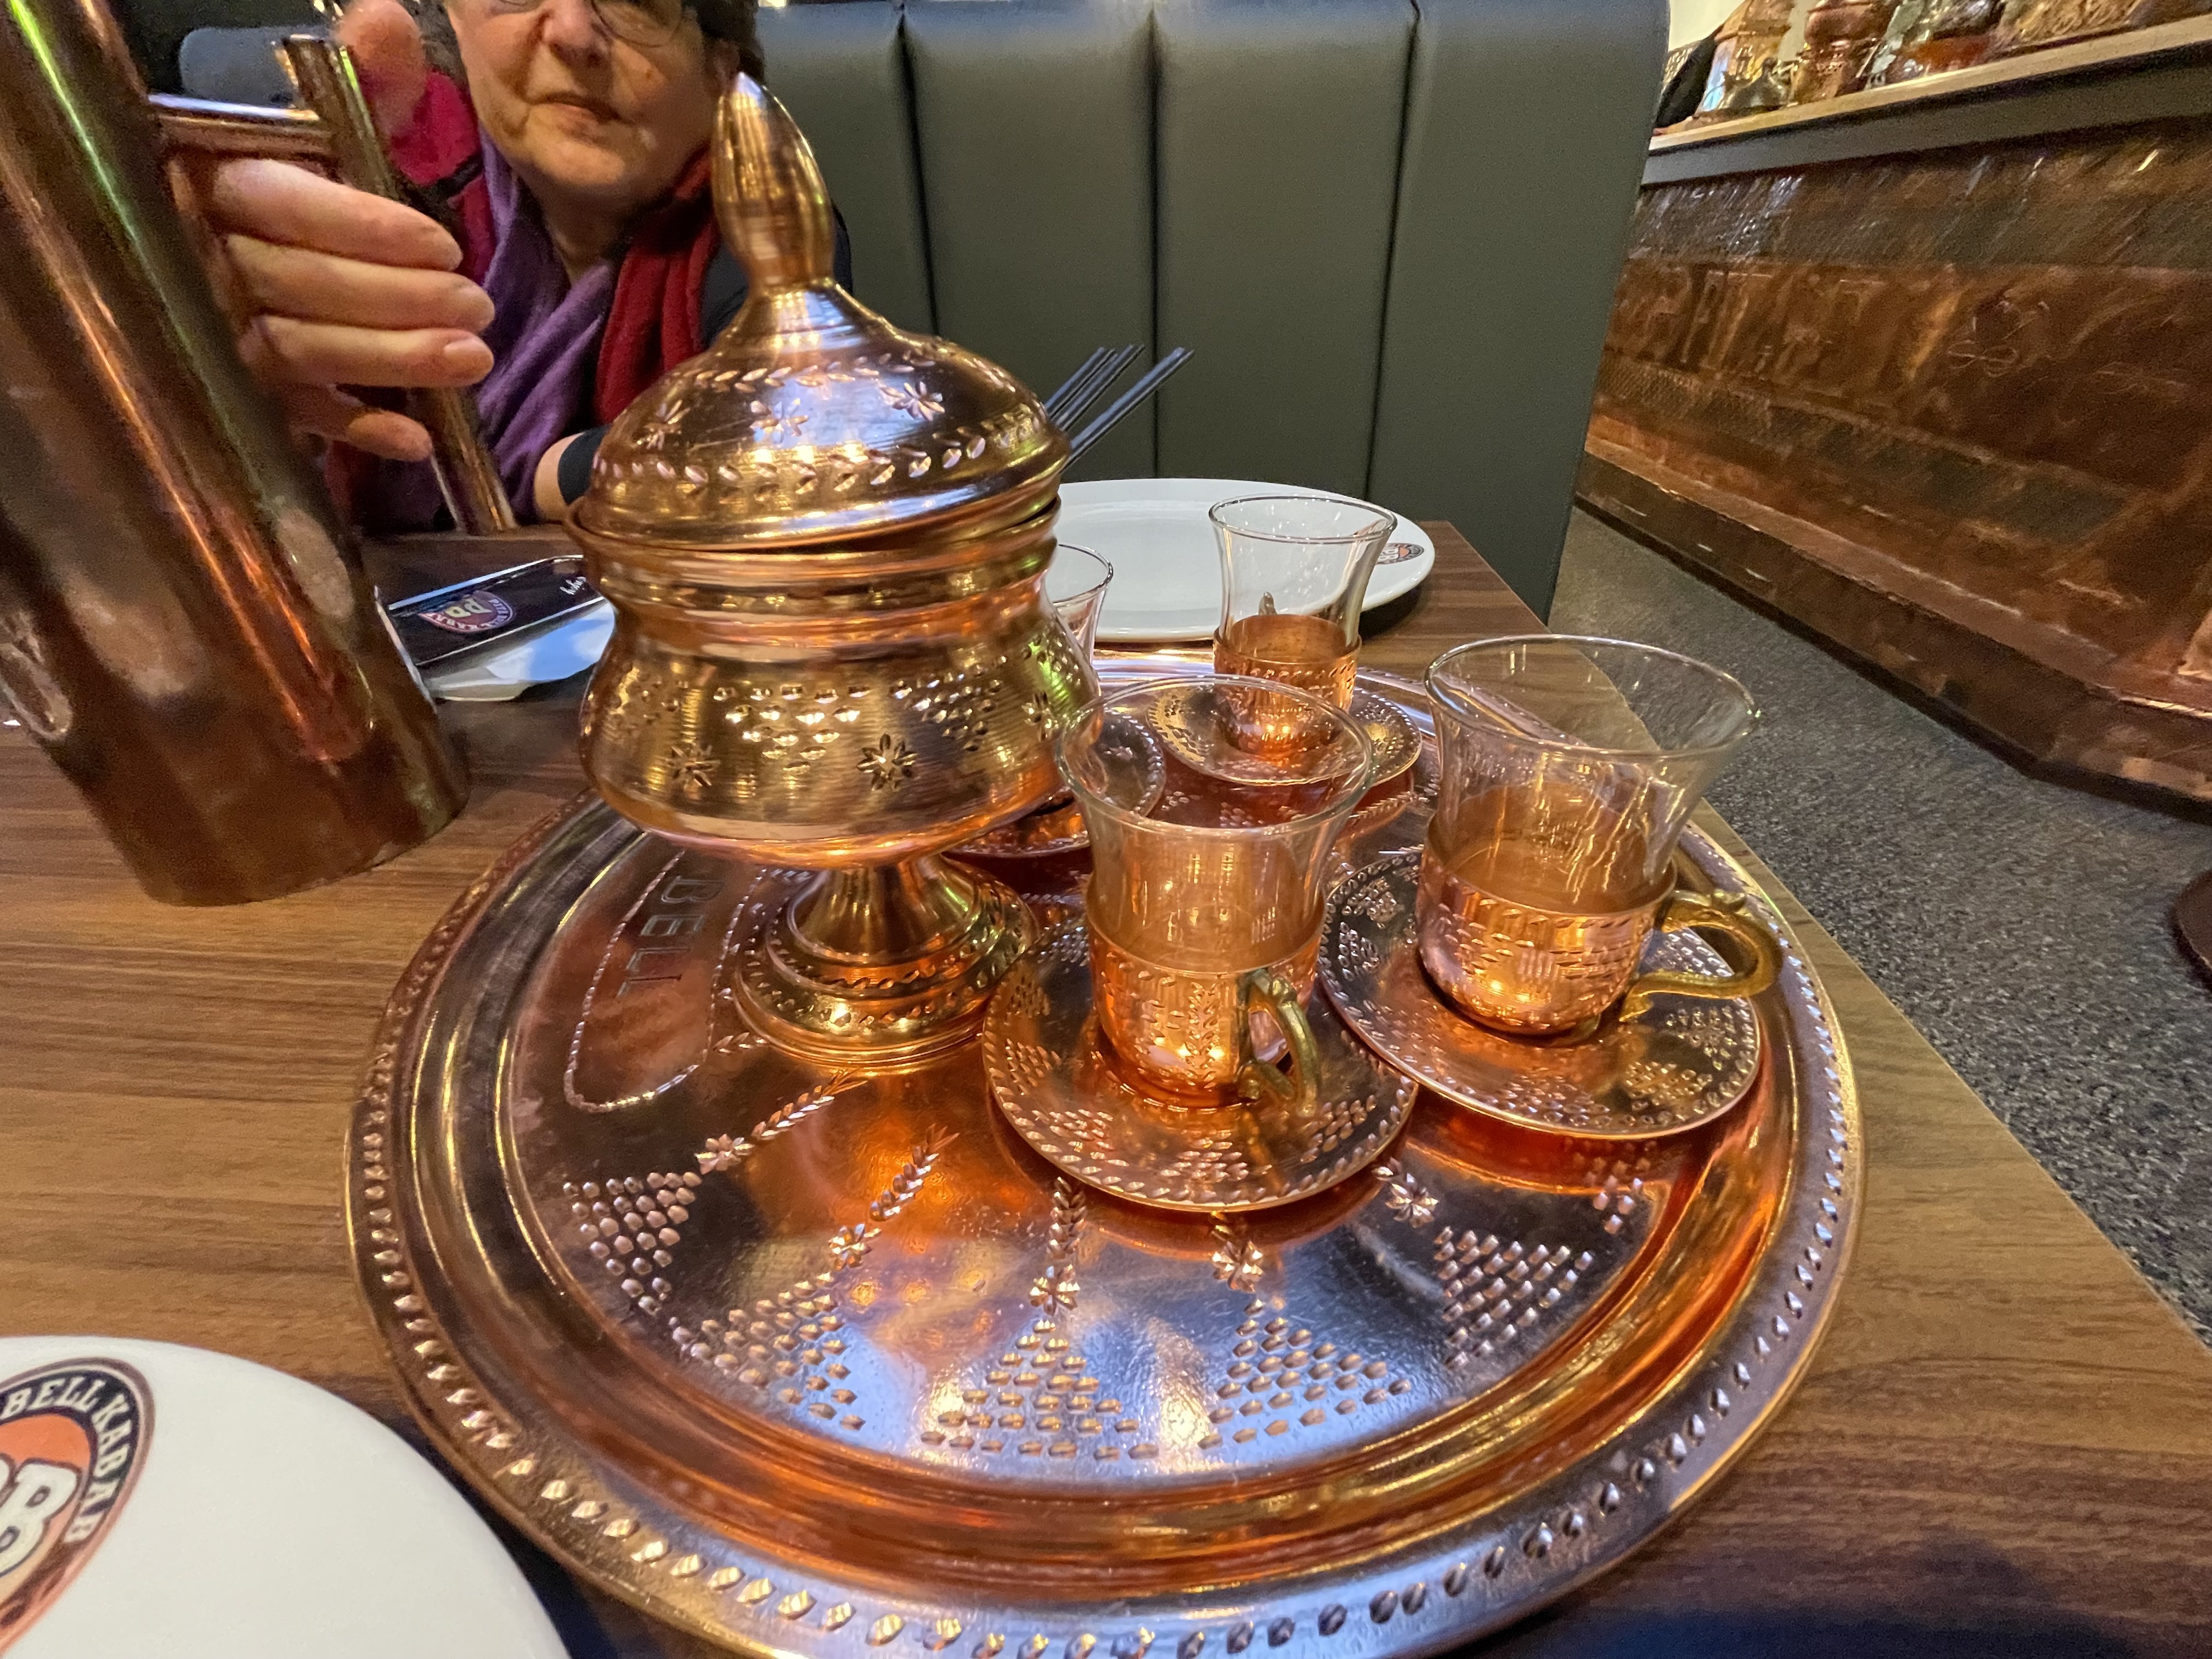 Turkish tea is typically prepared using two stacked teapots called "çaydanlık" specifically designed for tea preparation where water is brought to a boil in the larger lower teapot and then some of the water is used to fill the smaller teapot on top and steep several spoons of loose tea leaves, producing tea with a strong flavour